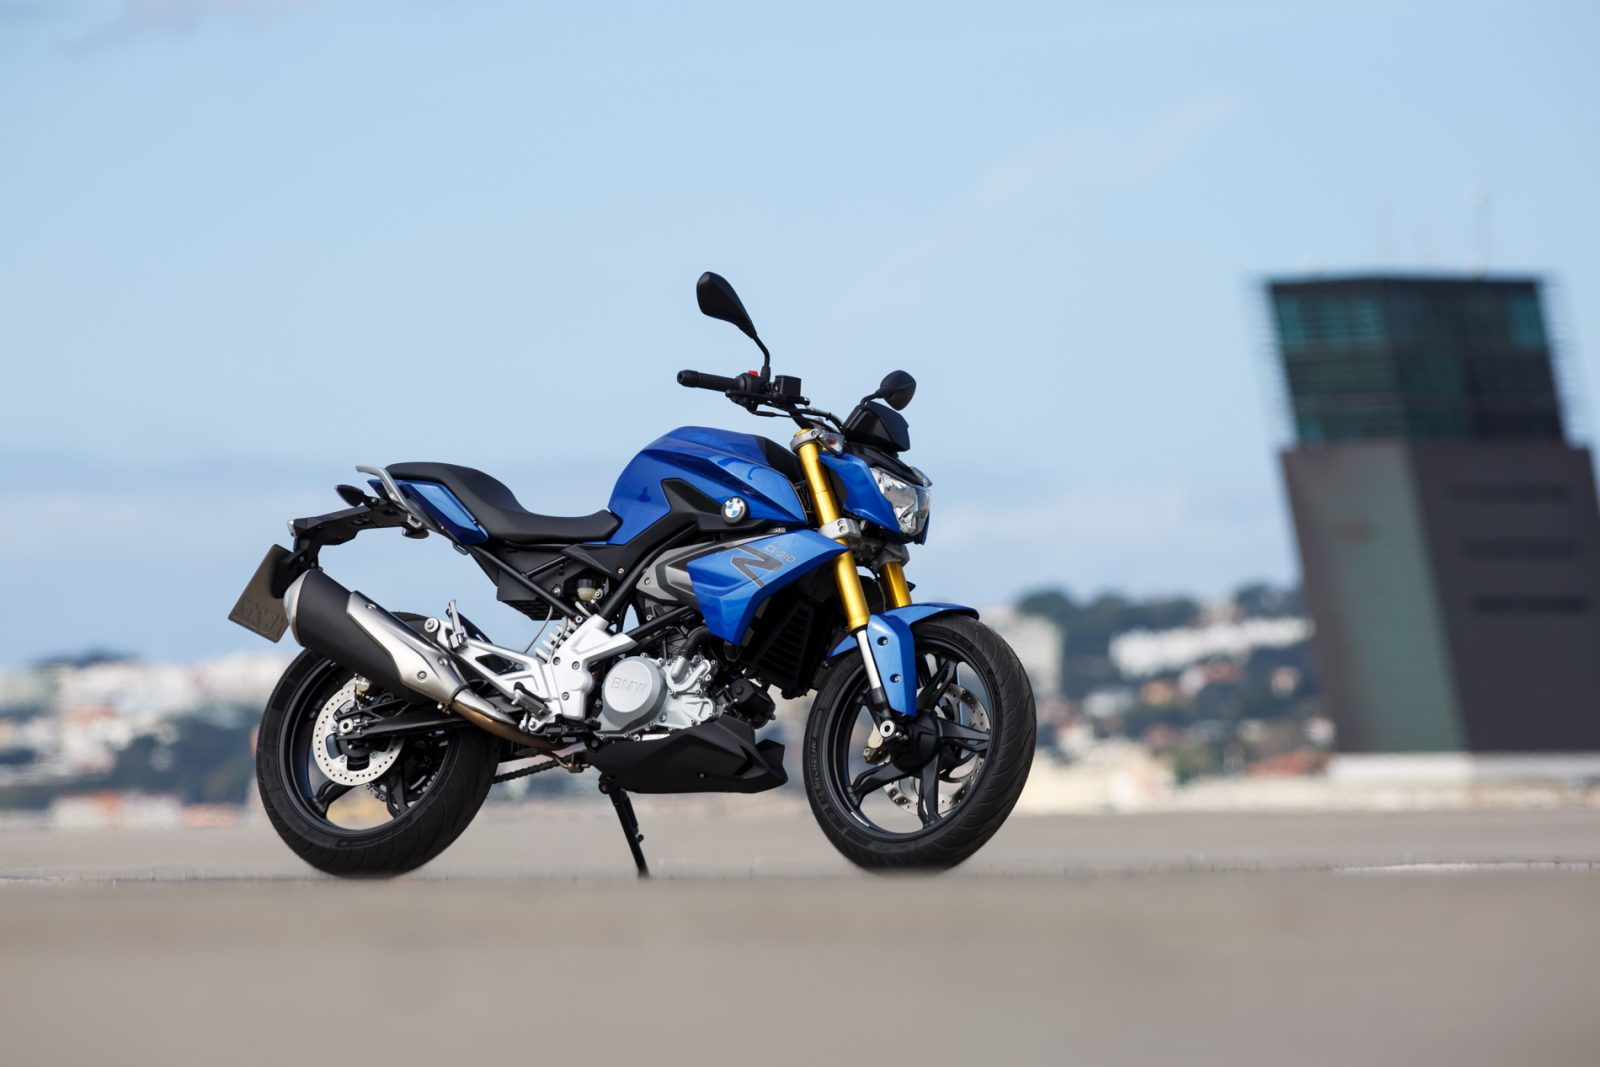 BMW announces pricing on G 310 R at $5790+ORC - Australian Motorcycle News